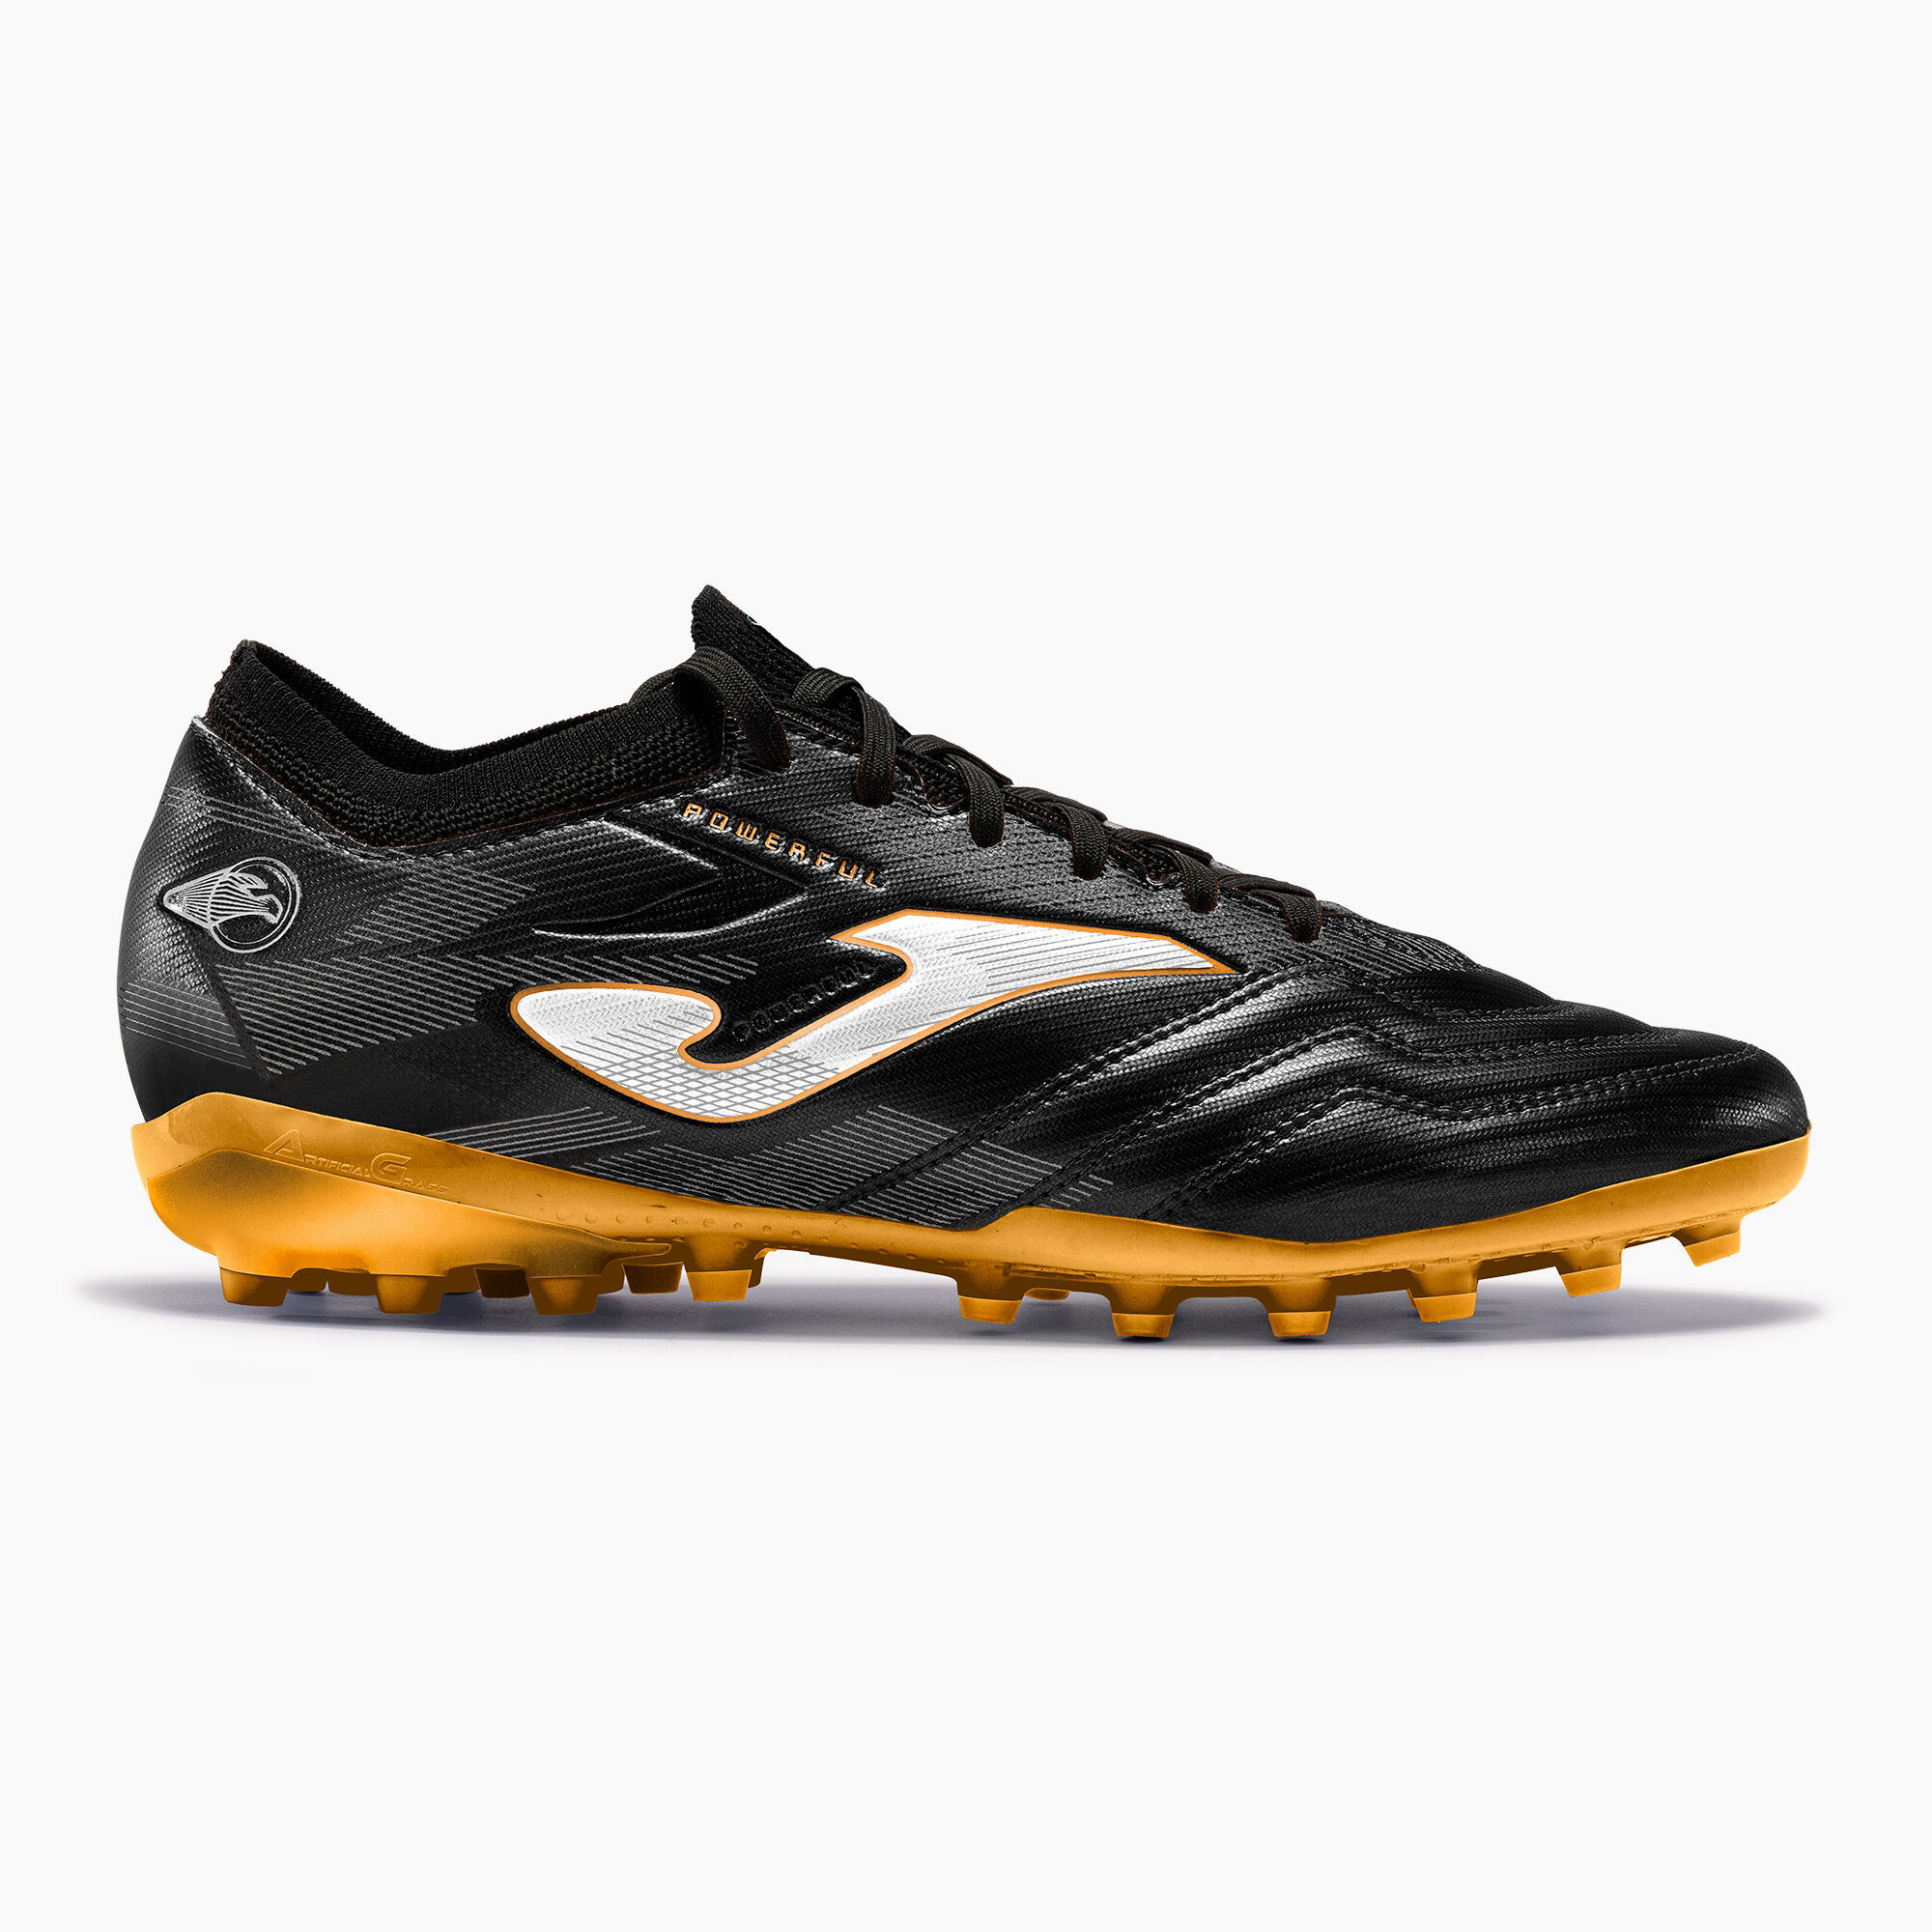 Football boots Powerful Cup 24 artificial grass black gold